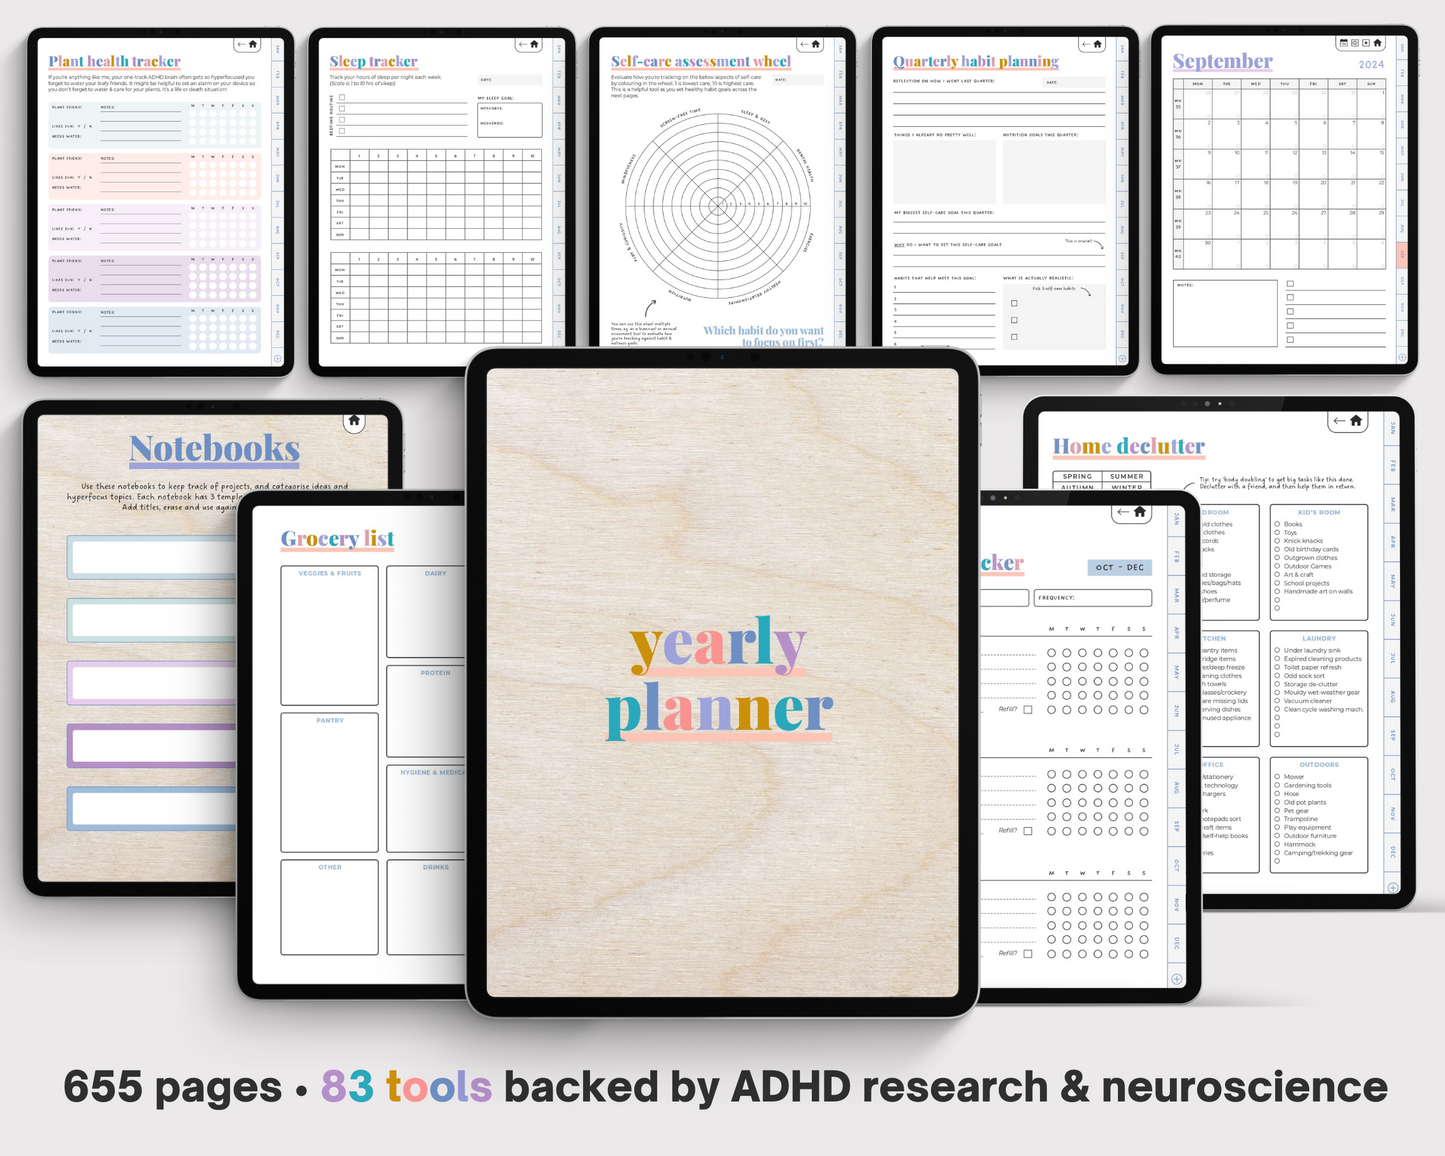 RAINBOW - ADHD Digital Planner for iPad & Android tablets